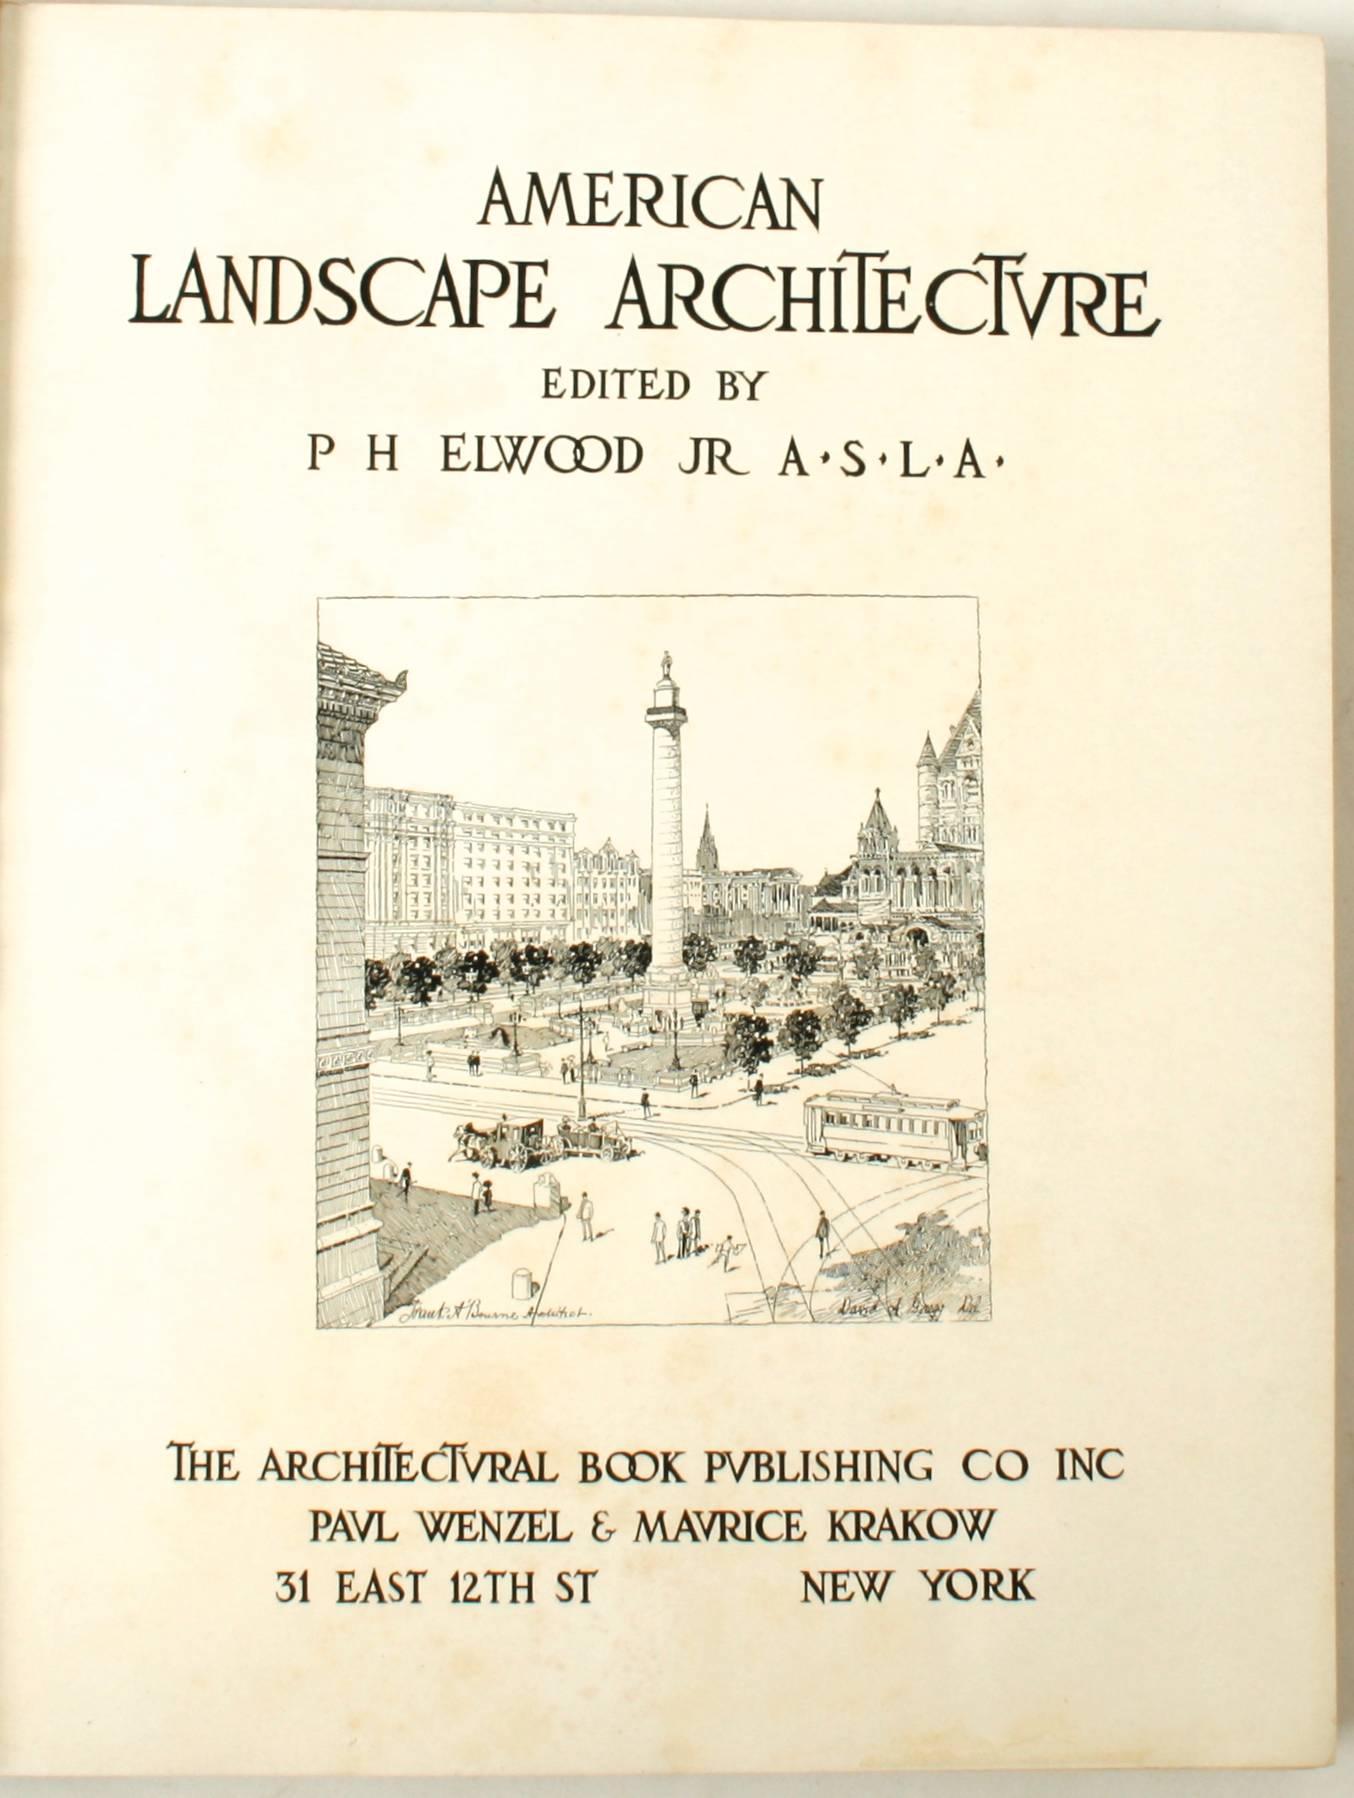 American landscape architecture by P. H. Elwood Jr. New York: The Architectural Book Publishing Co. Inc., 1924. First edition hardcover with no dust jacket. 194 pp. A large format antique book on American landscape architecture including many full